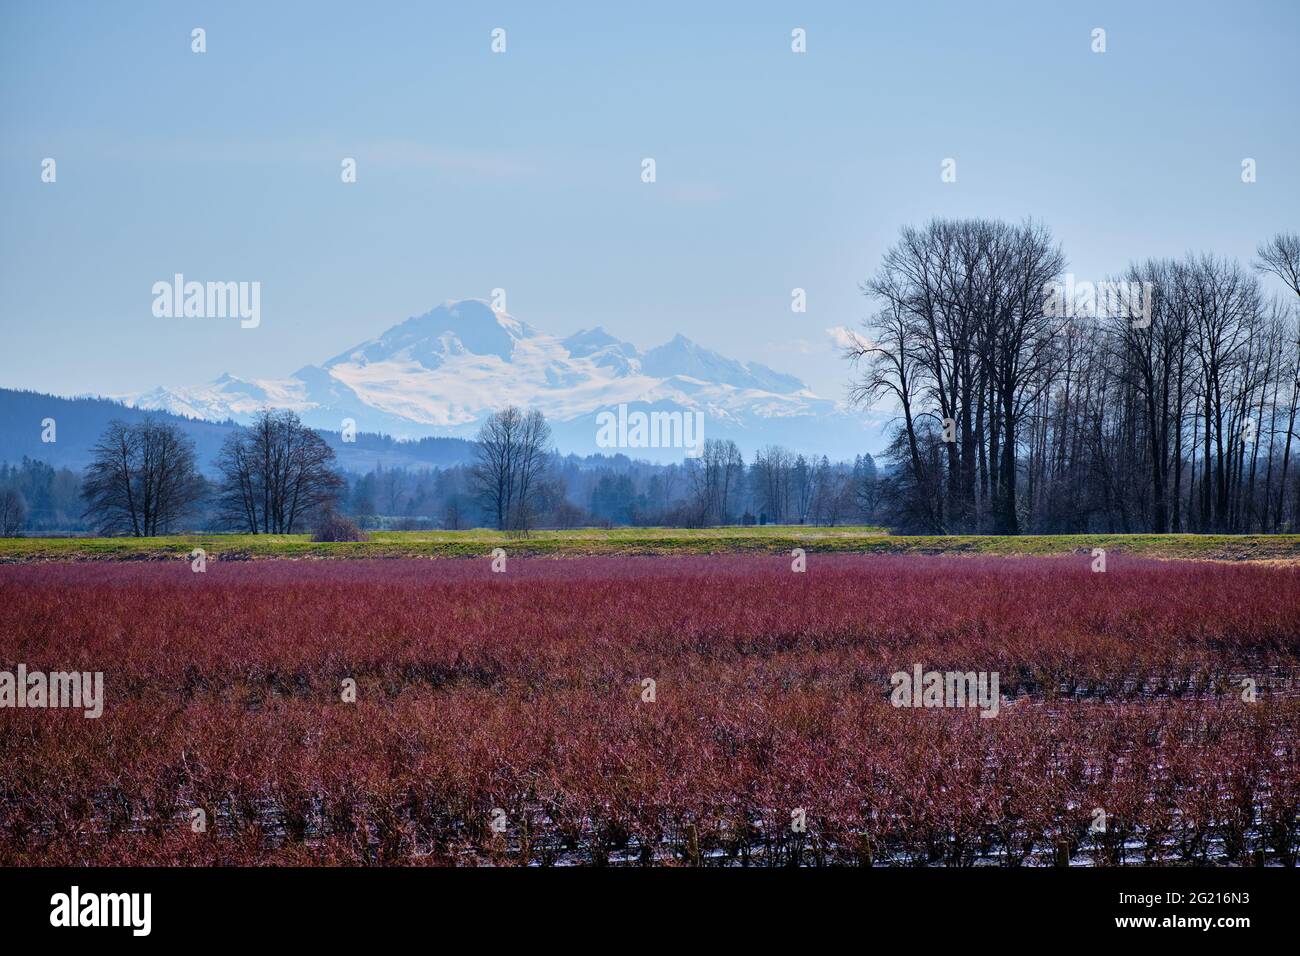 Winter in Pitt Meadows: Abundant snow on glorious Mount Baker while blueberry fields glow red in the sunshine Stock Photo